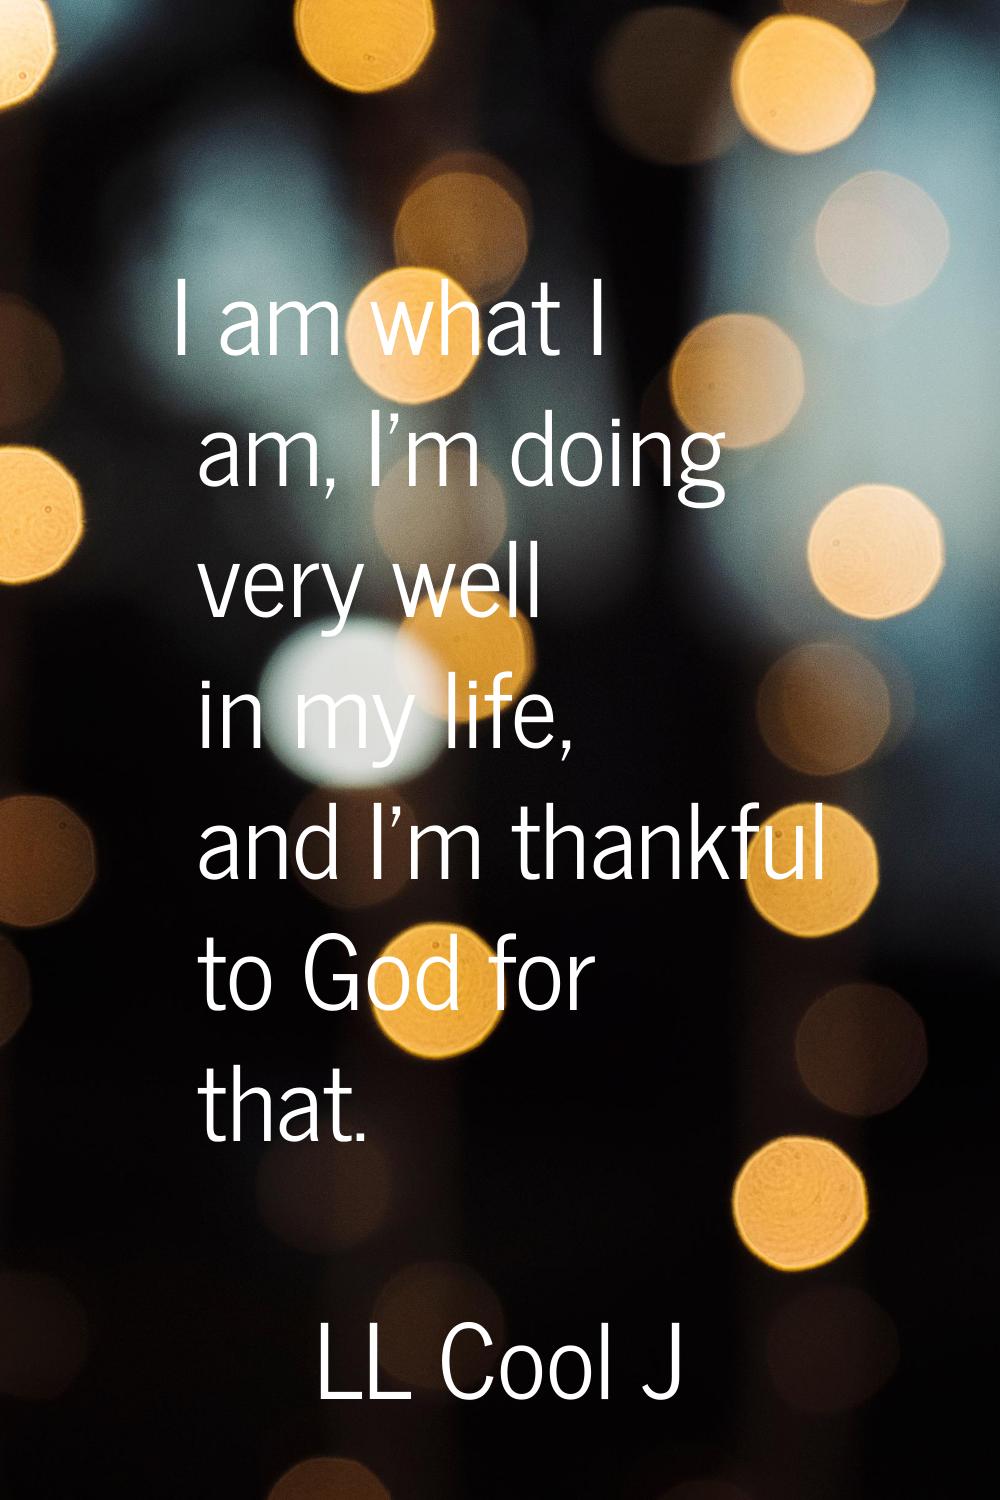 I am what I am, I'm doing very well in my life, and I'm thankful to God for that.